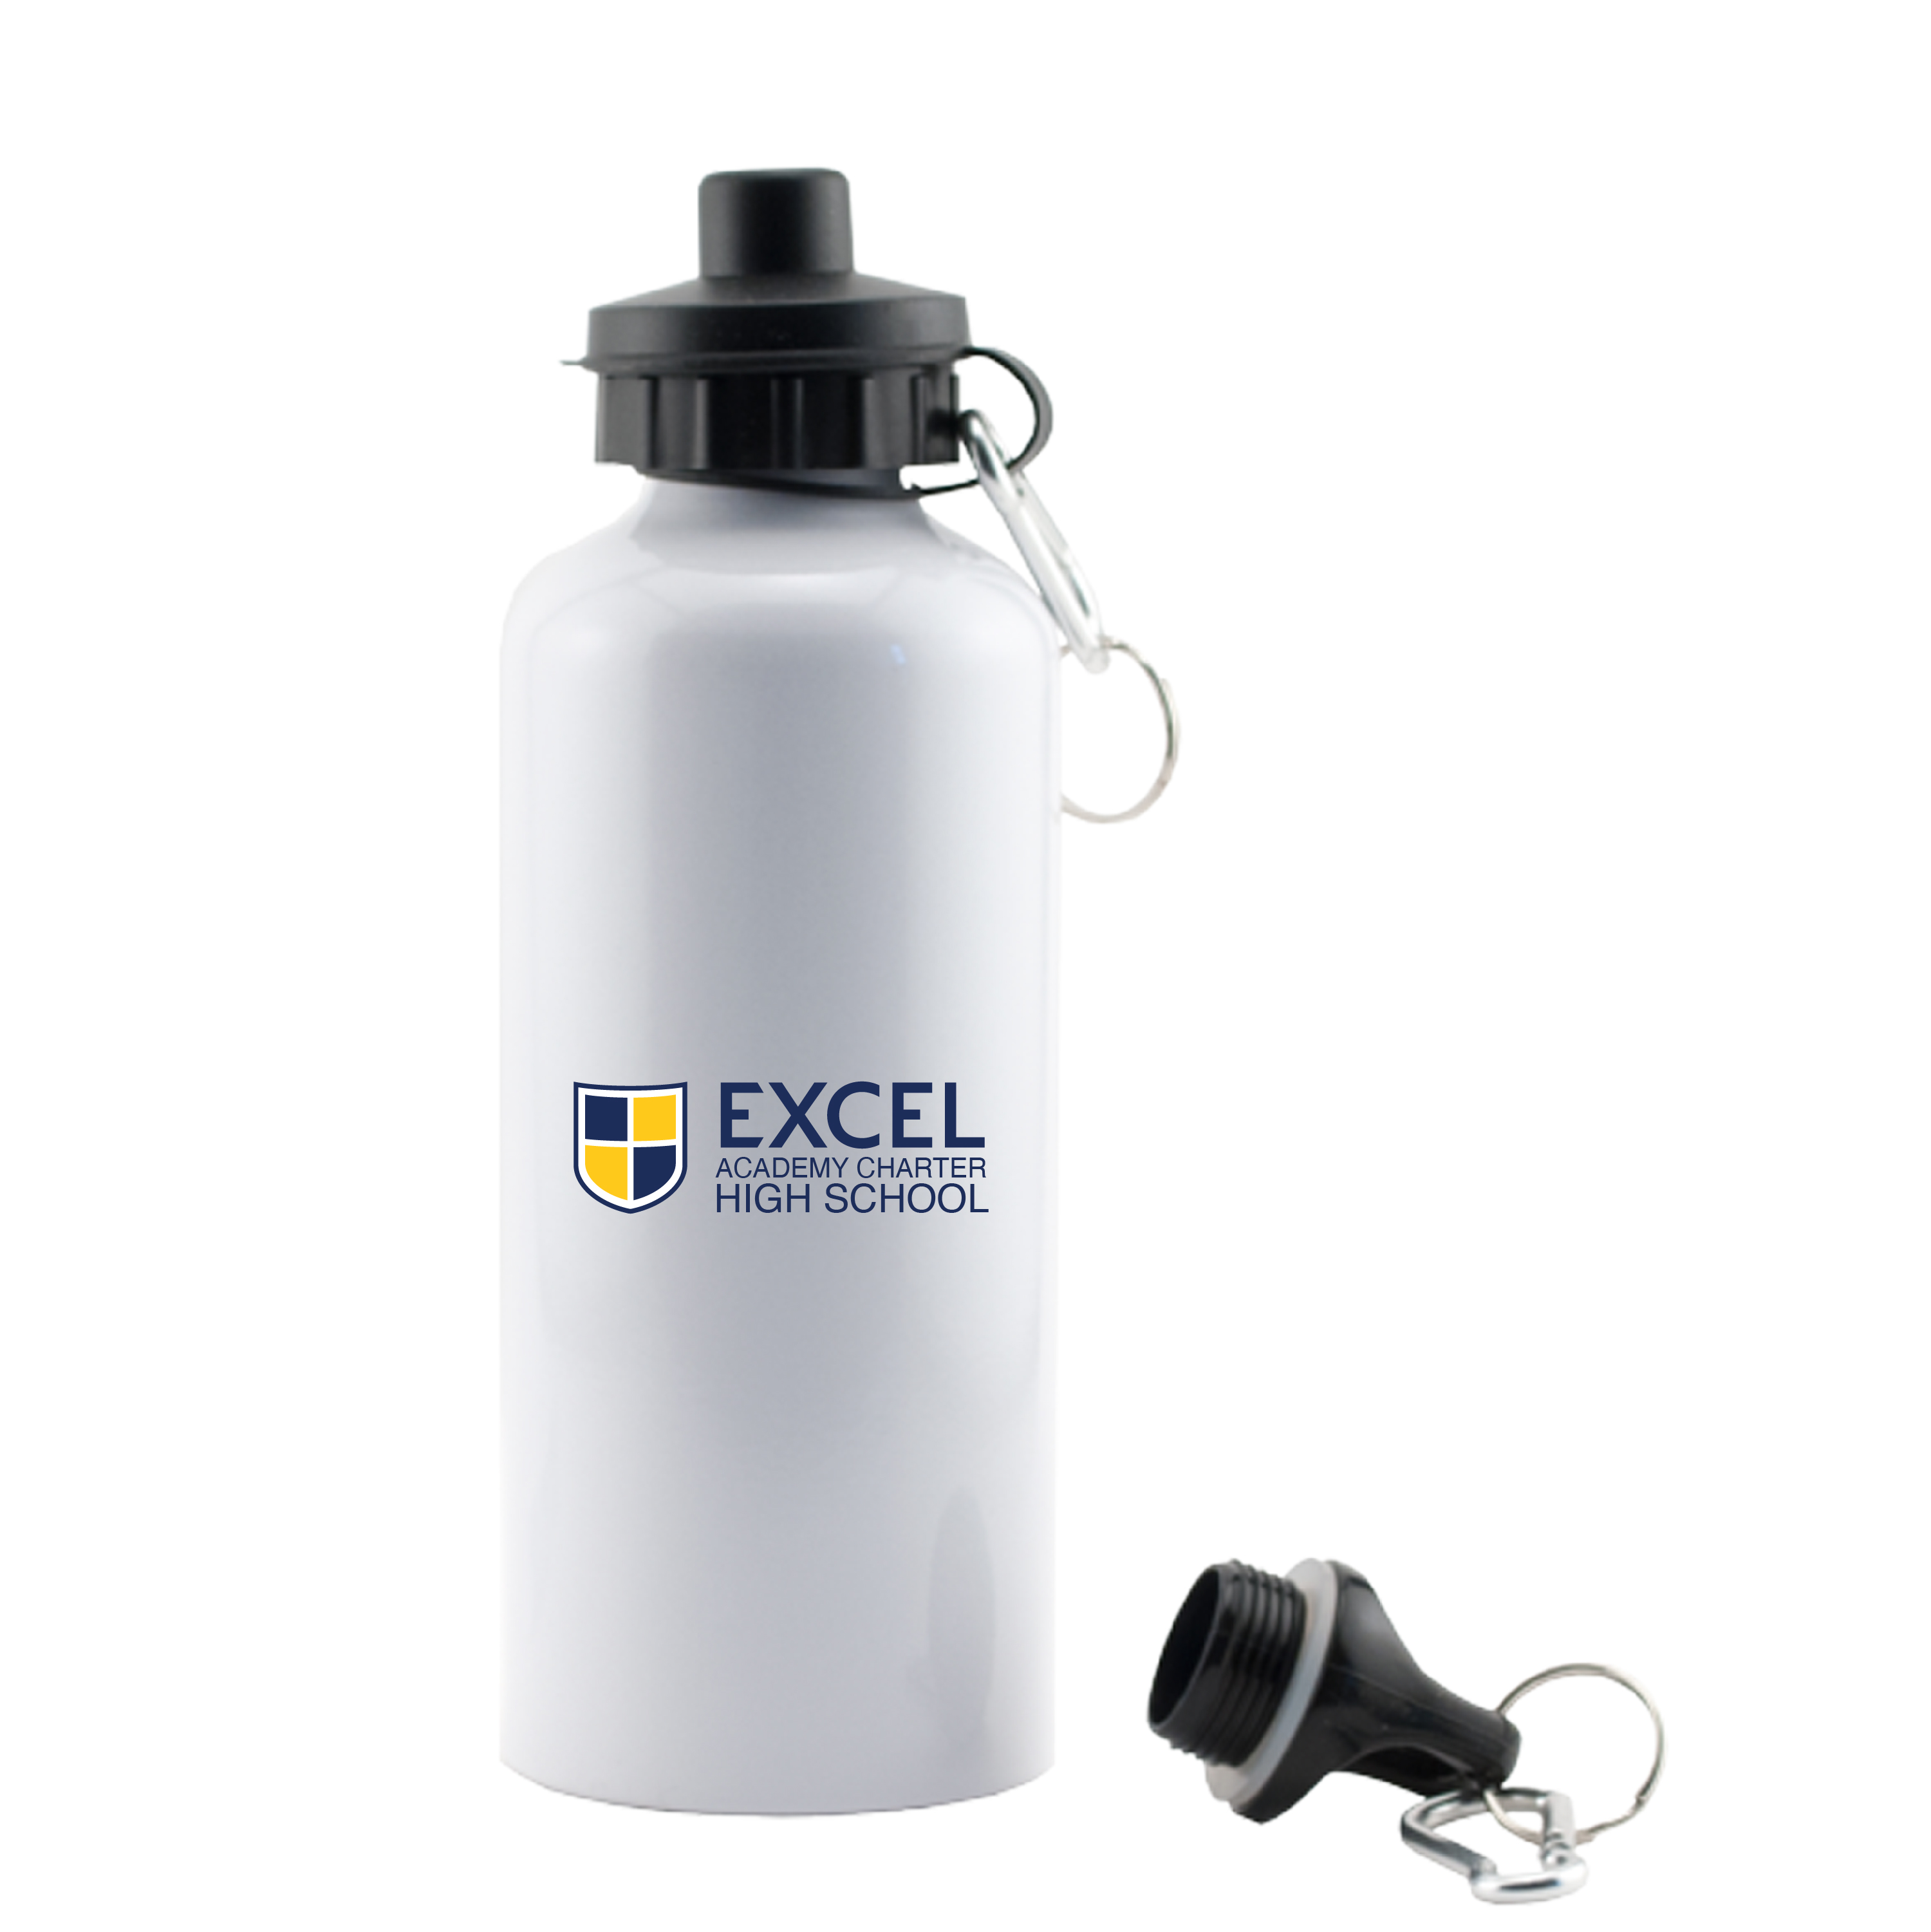 Excel Academy Charter High School SUBLIMATION ALUMINUM WATER BOTTLE